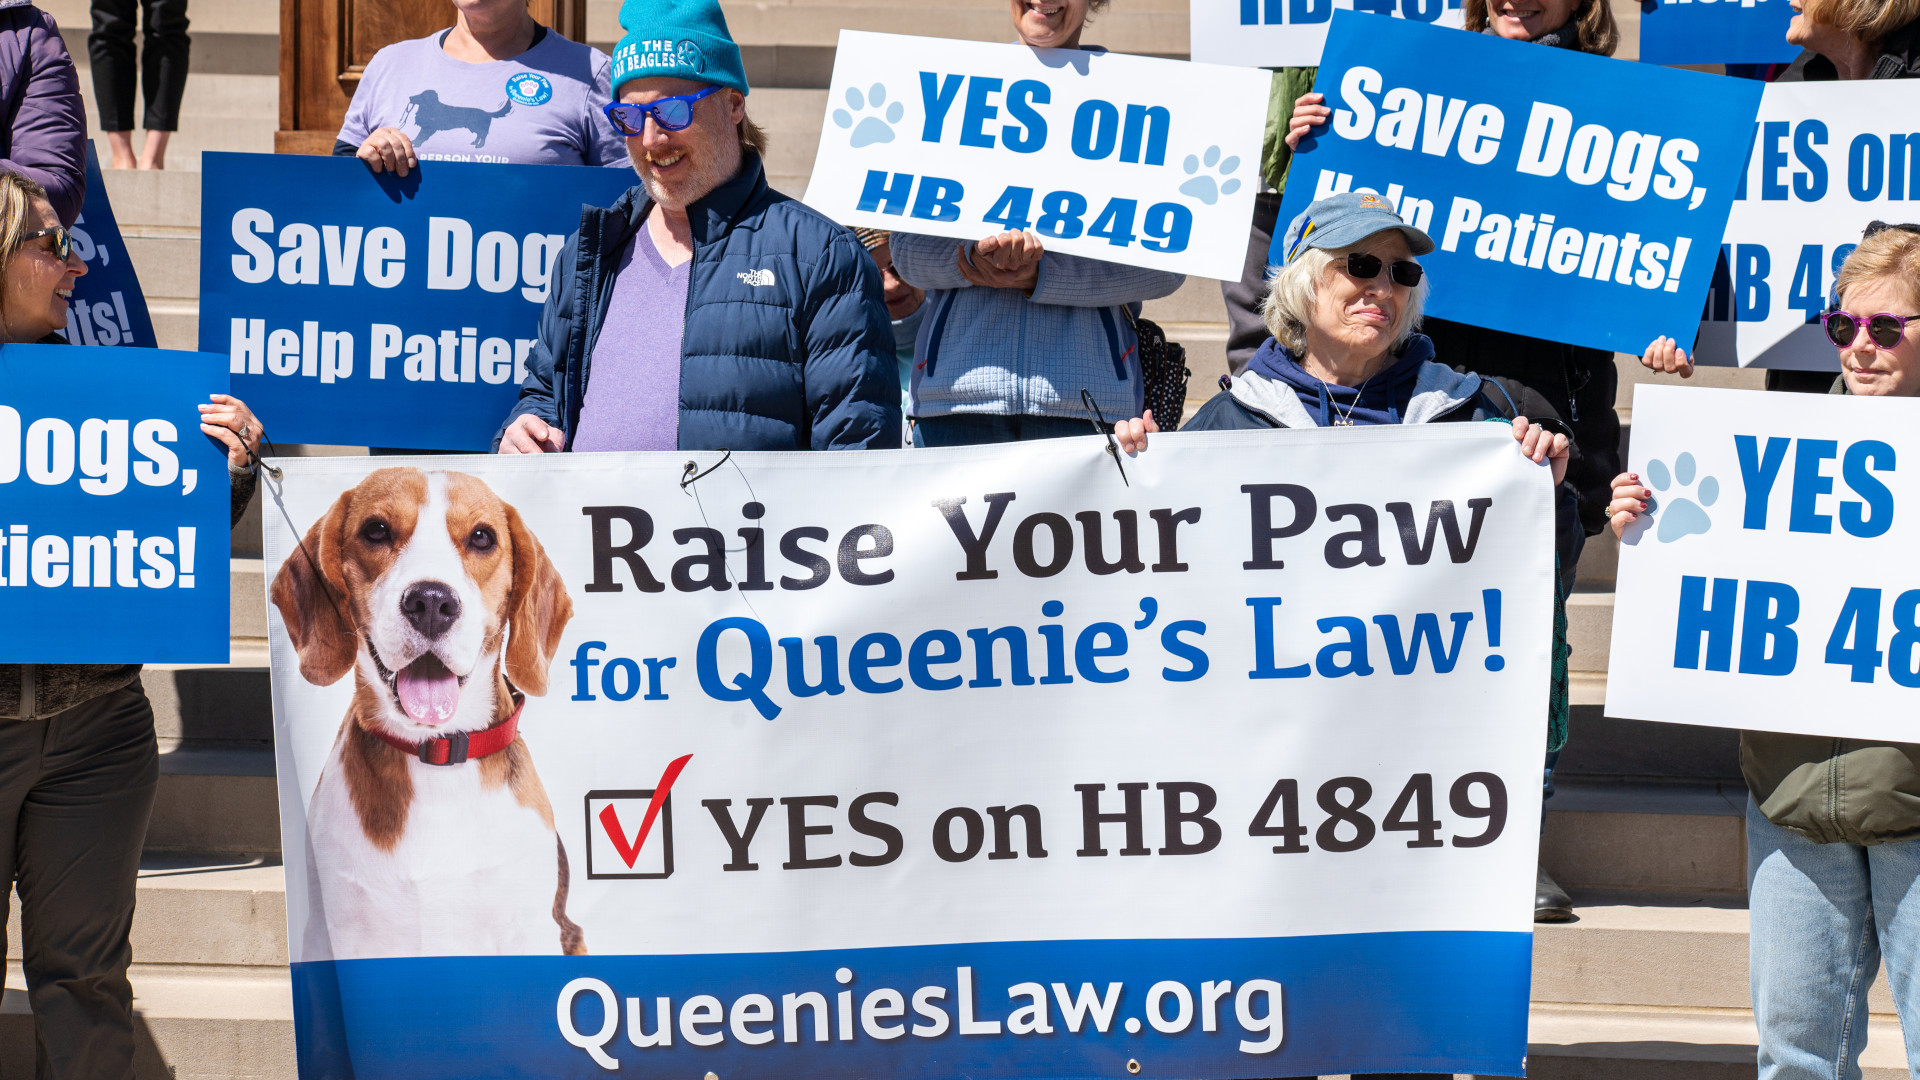 Lily Tomlin, Dogs, Michigan Residents Ask Legislators to “Raise Your Paw for Queenie’s Law!”